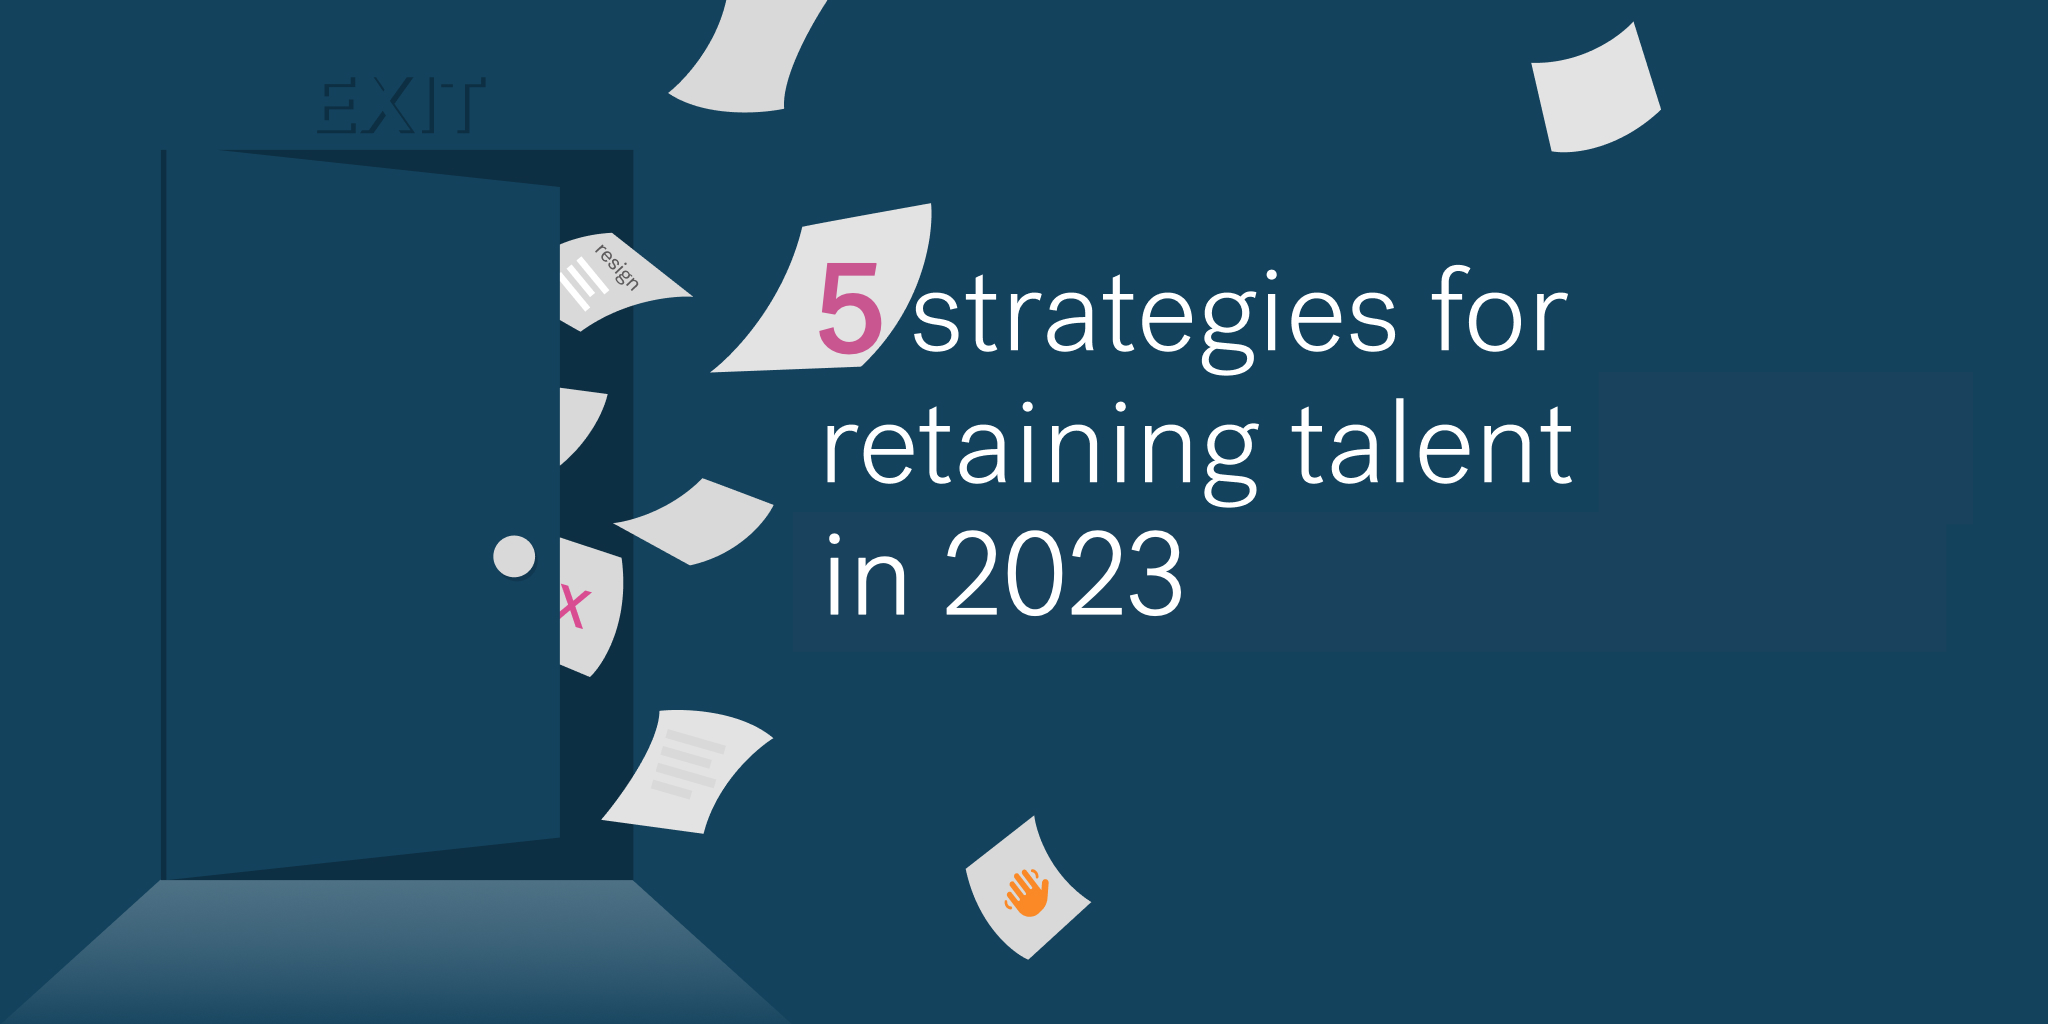 Image says 5 strategies for retaining talent in 2023